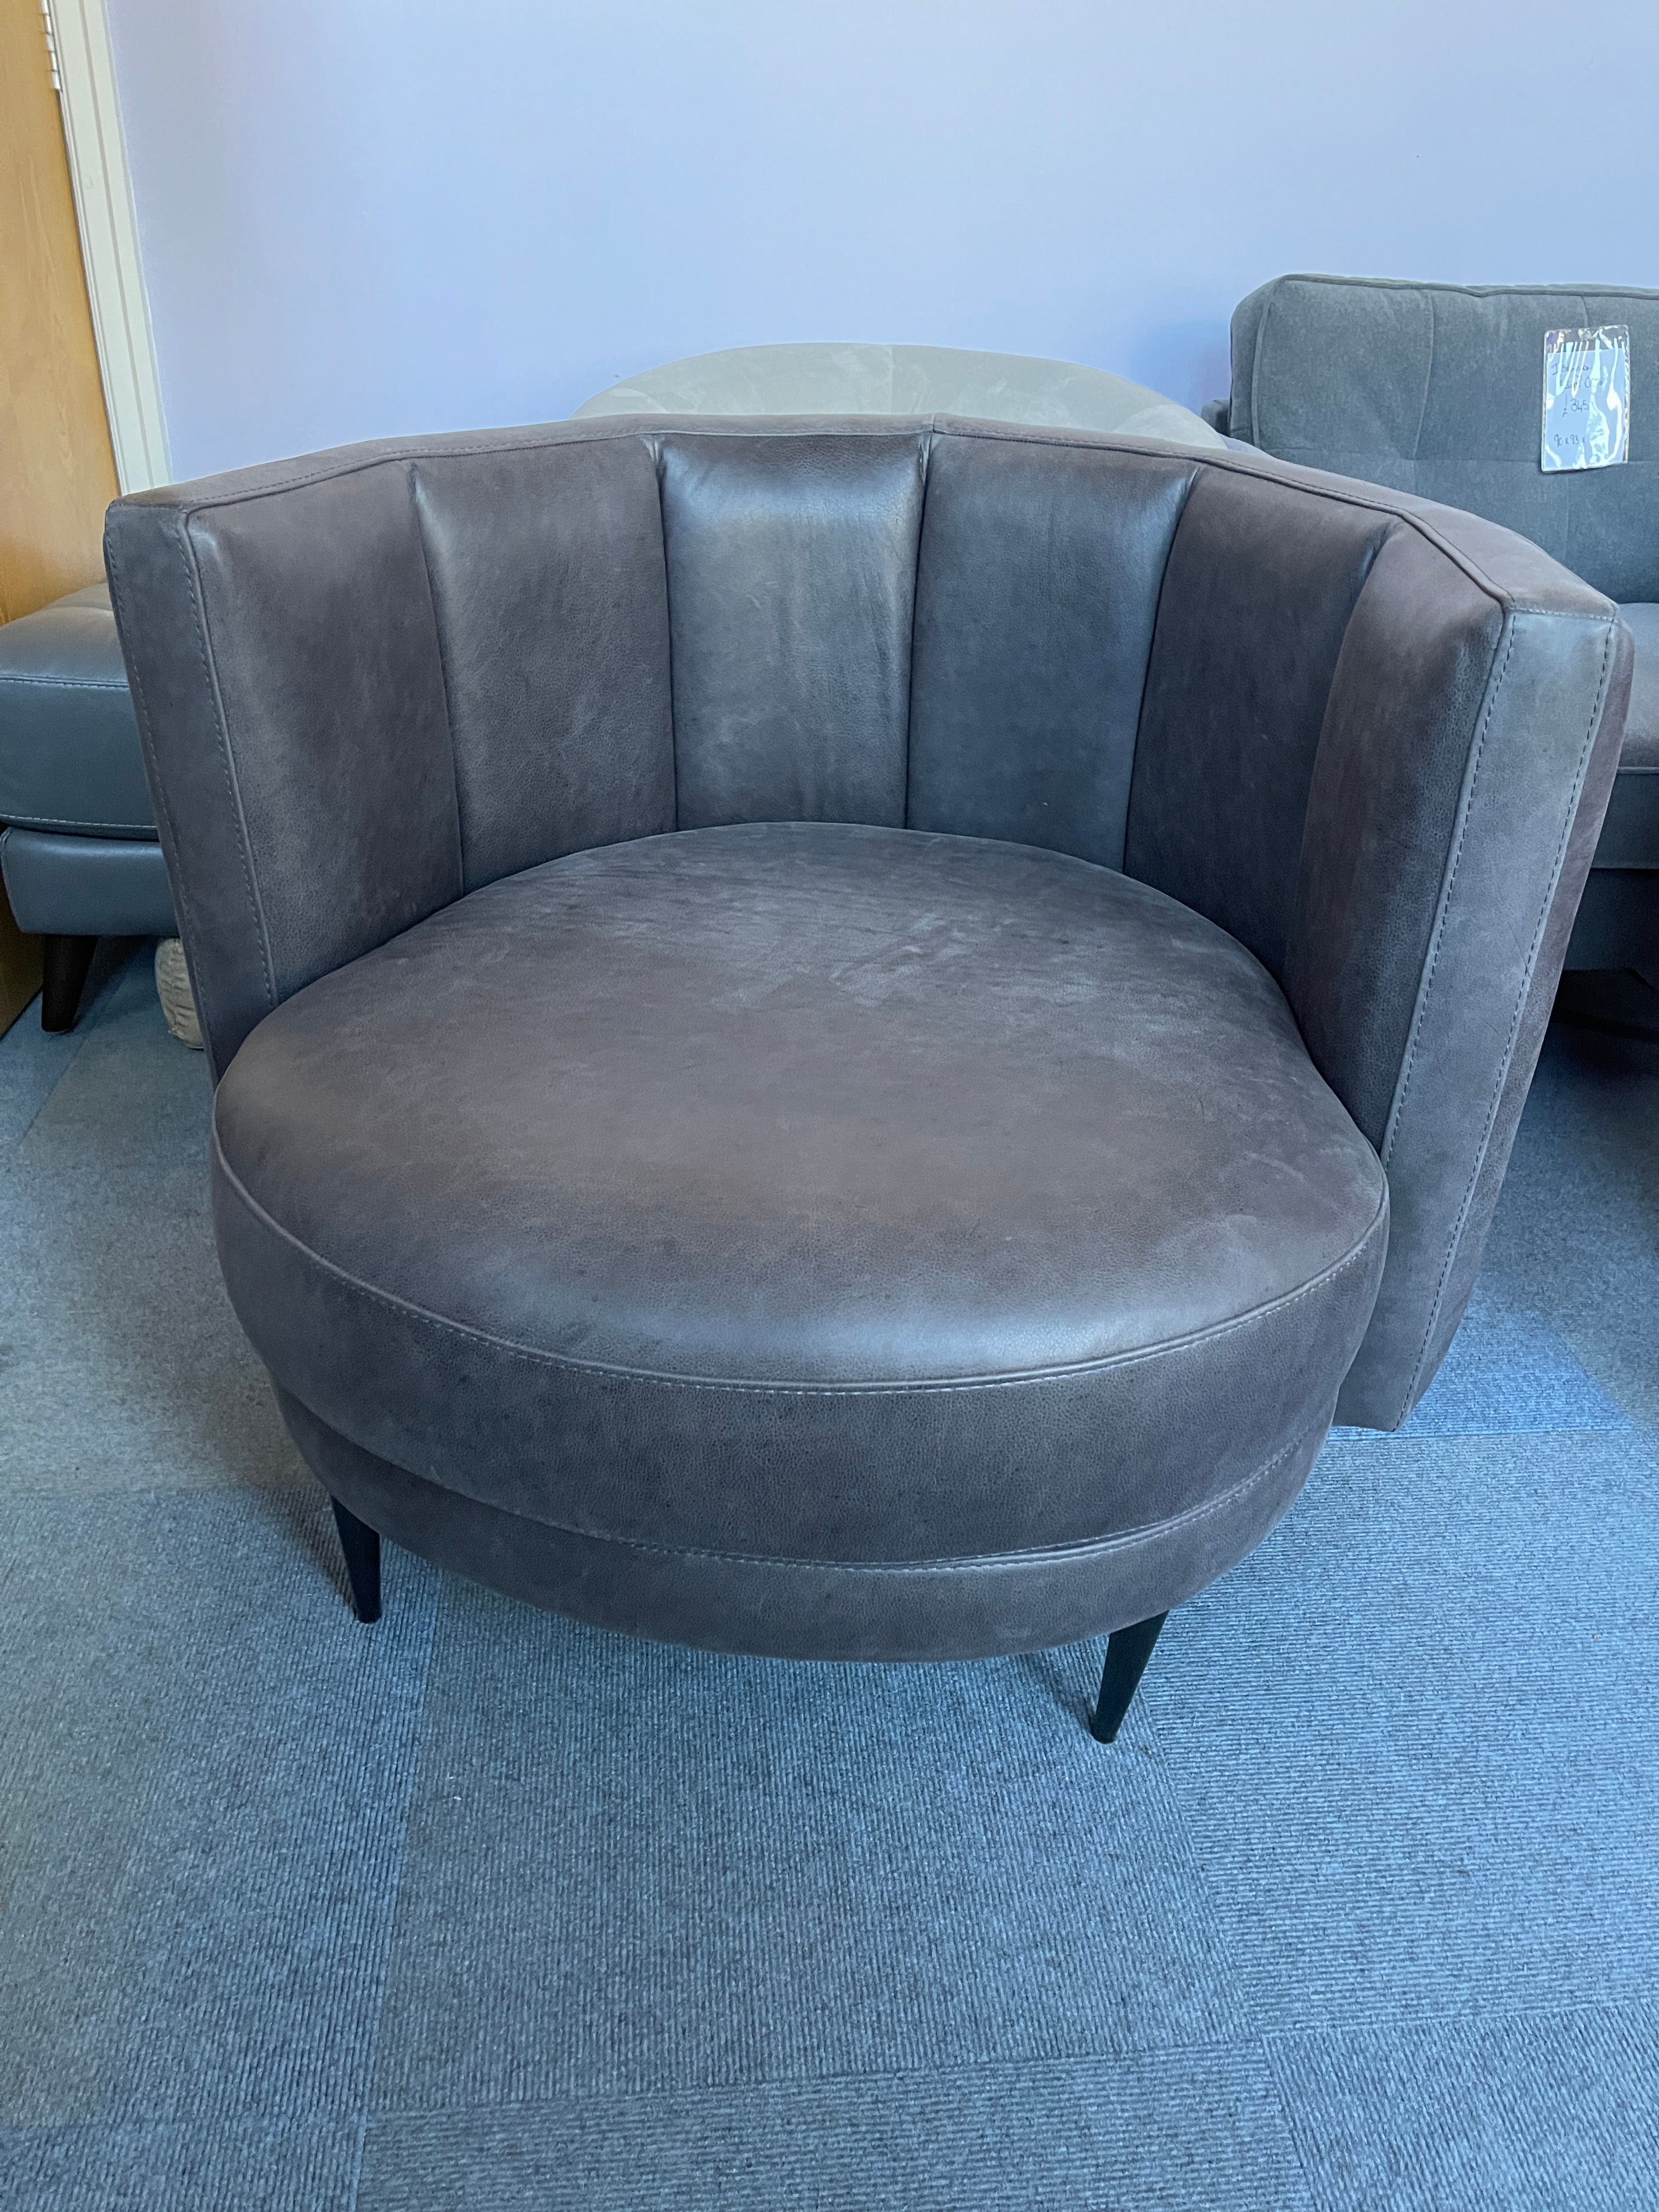 Linara retro round tub chair in charcoal grey leather